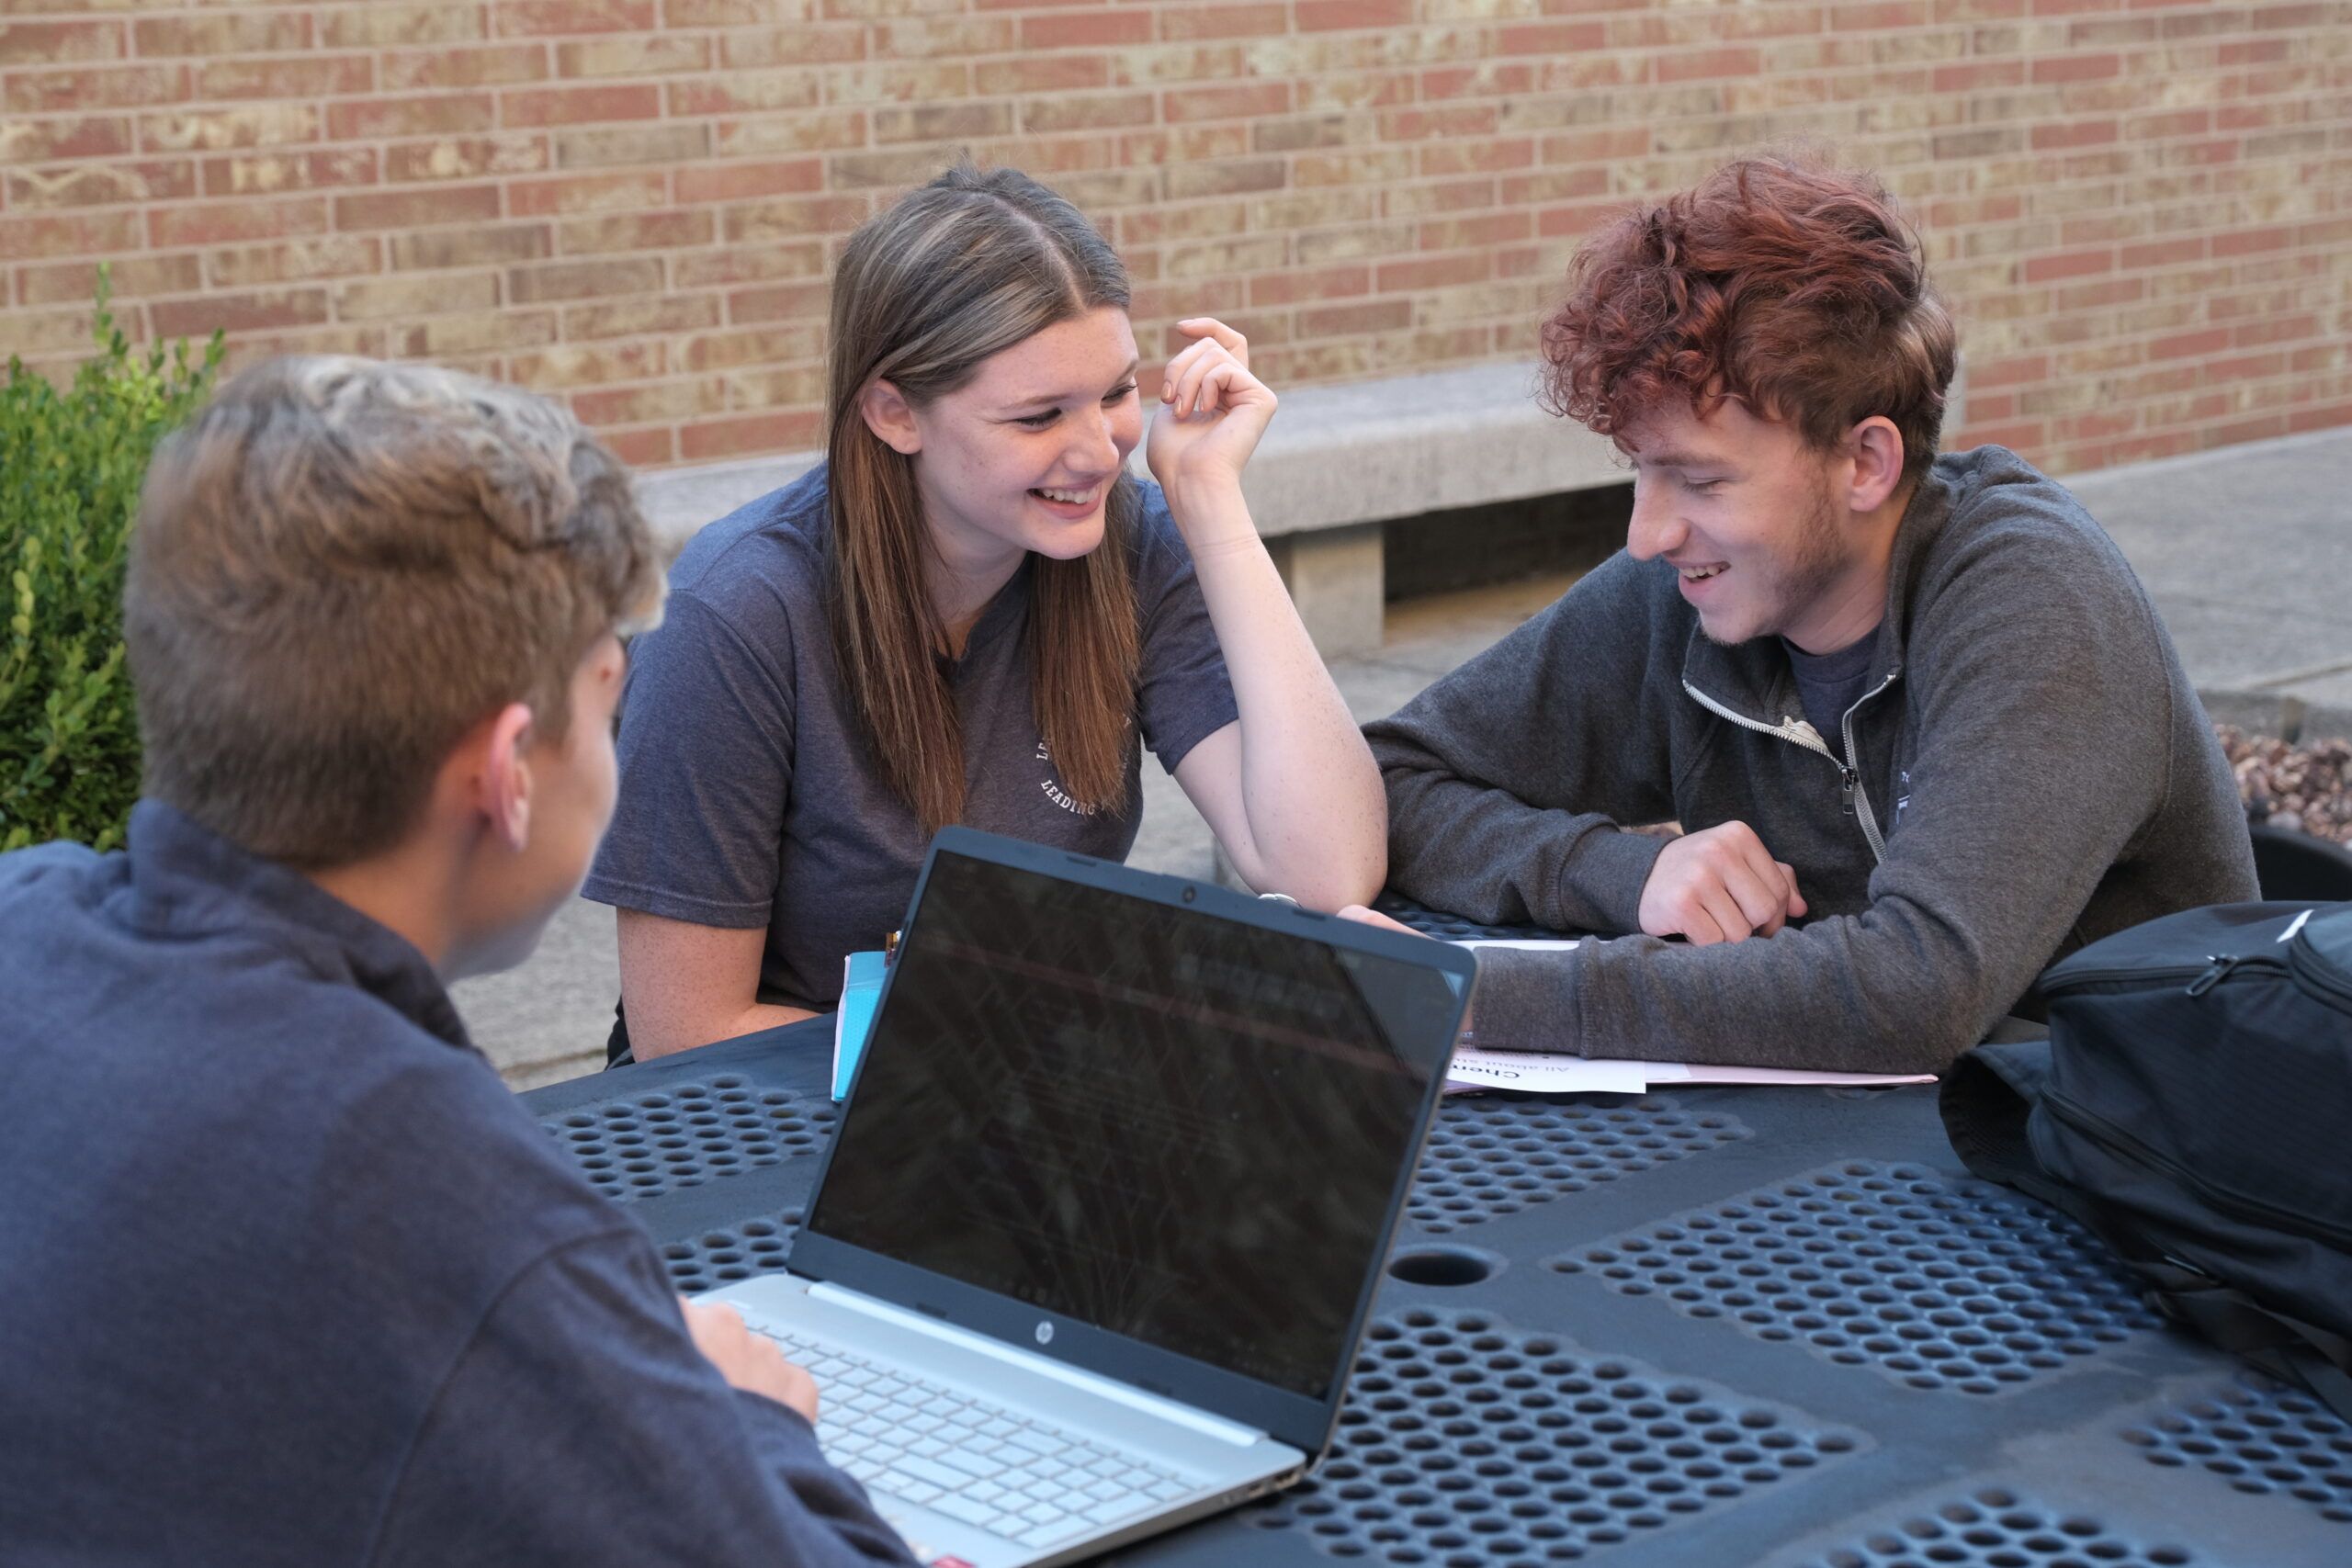 students at an outdoor table studying